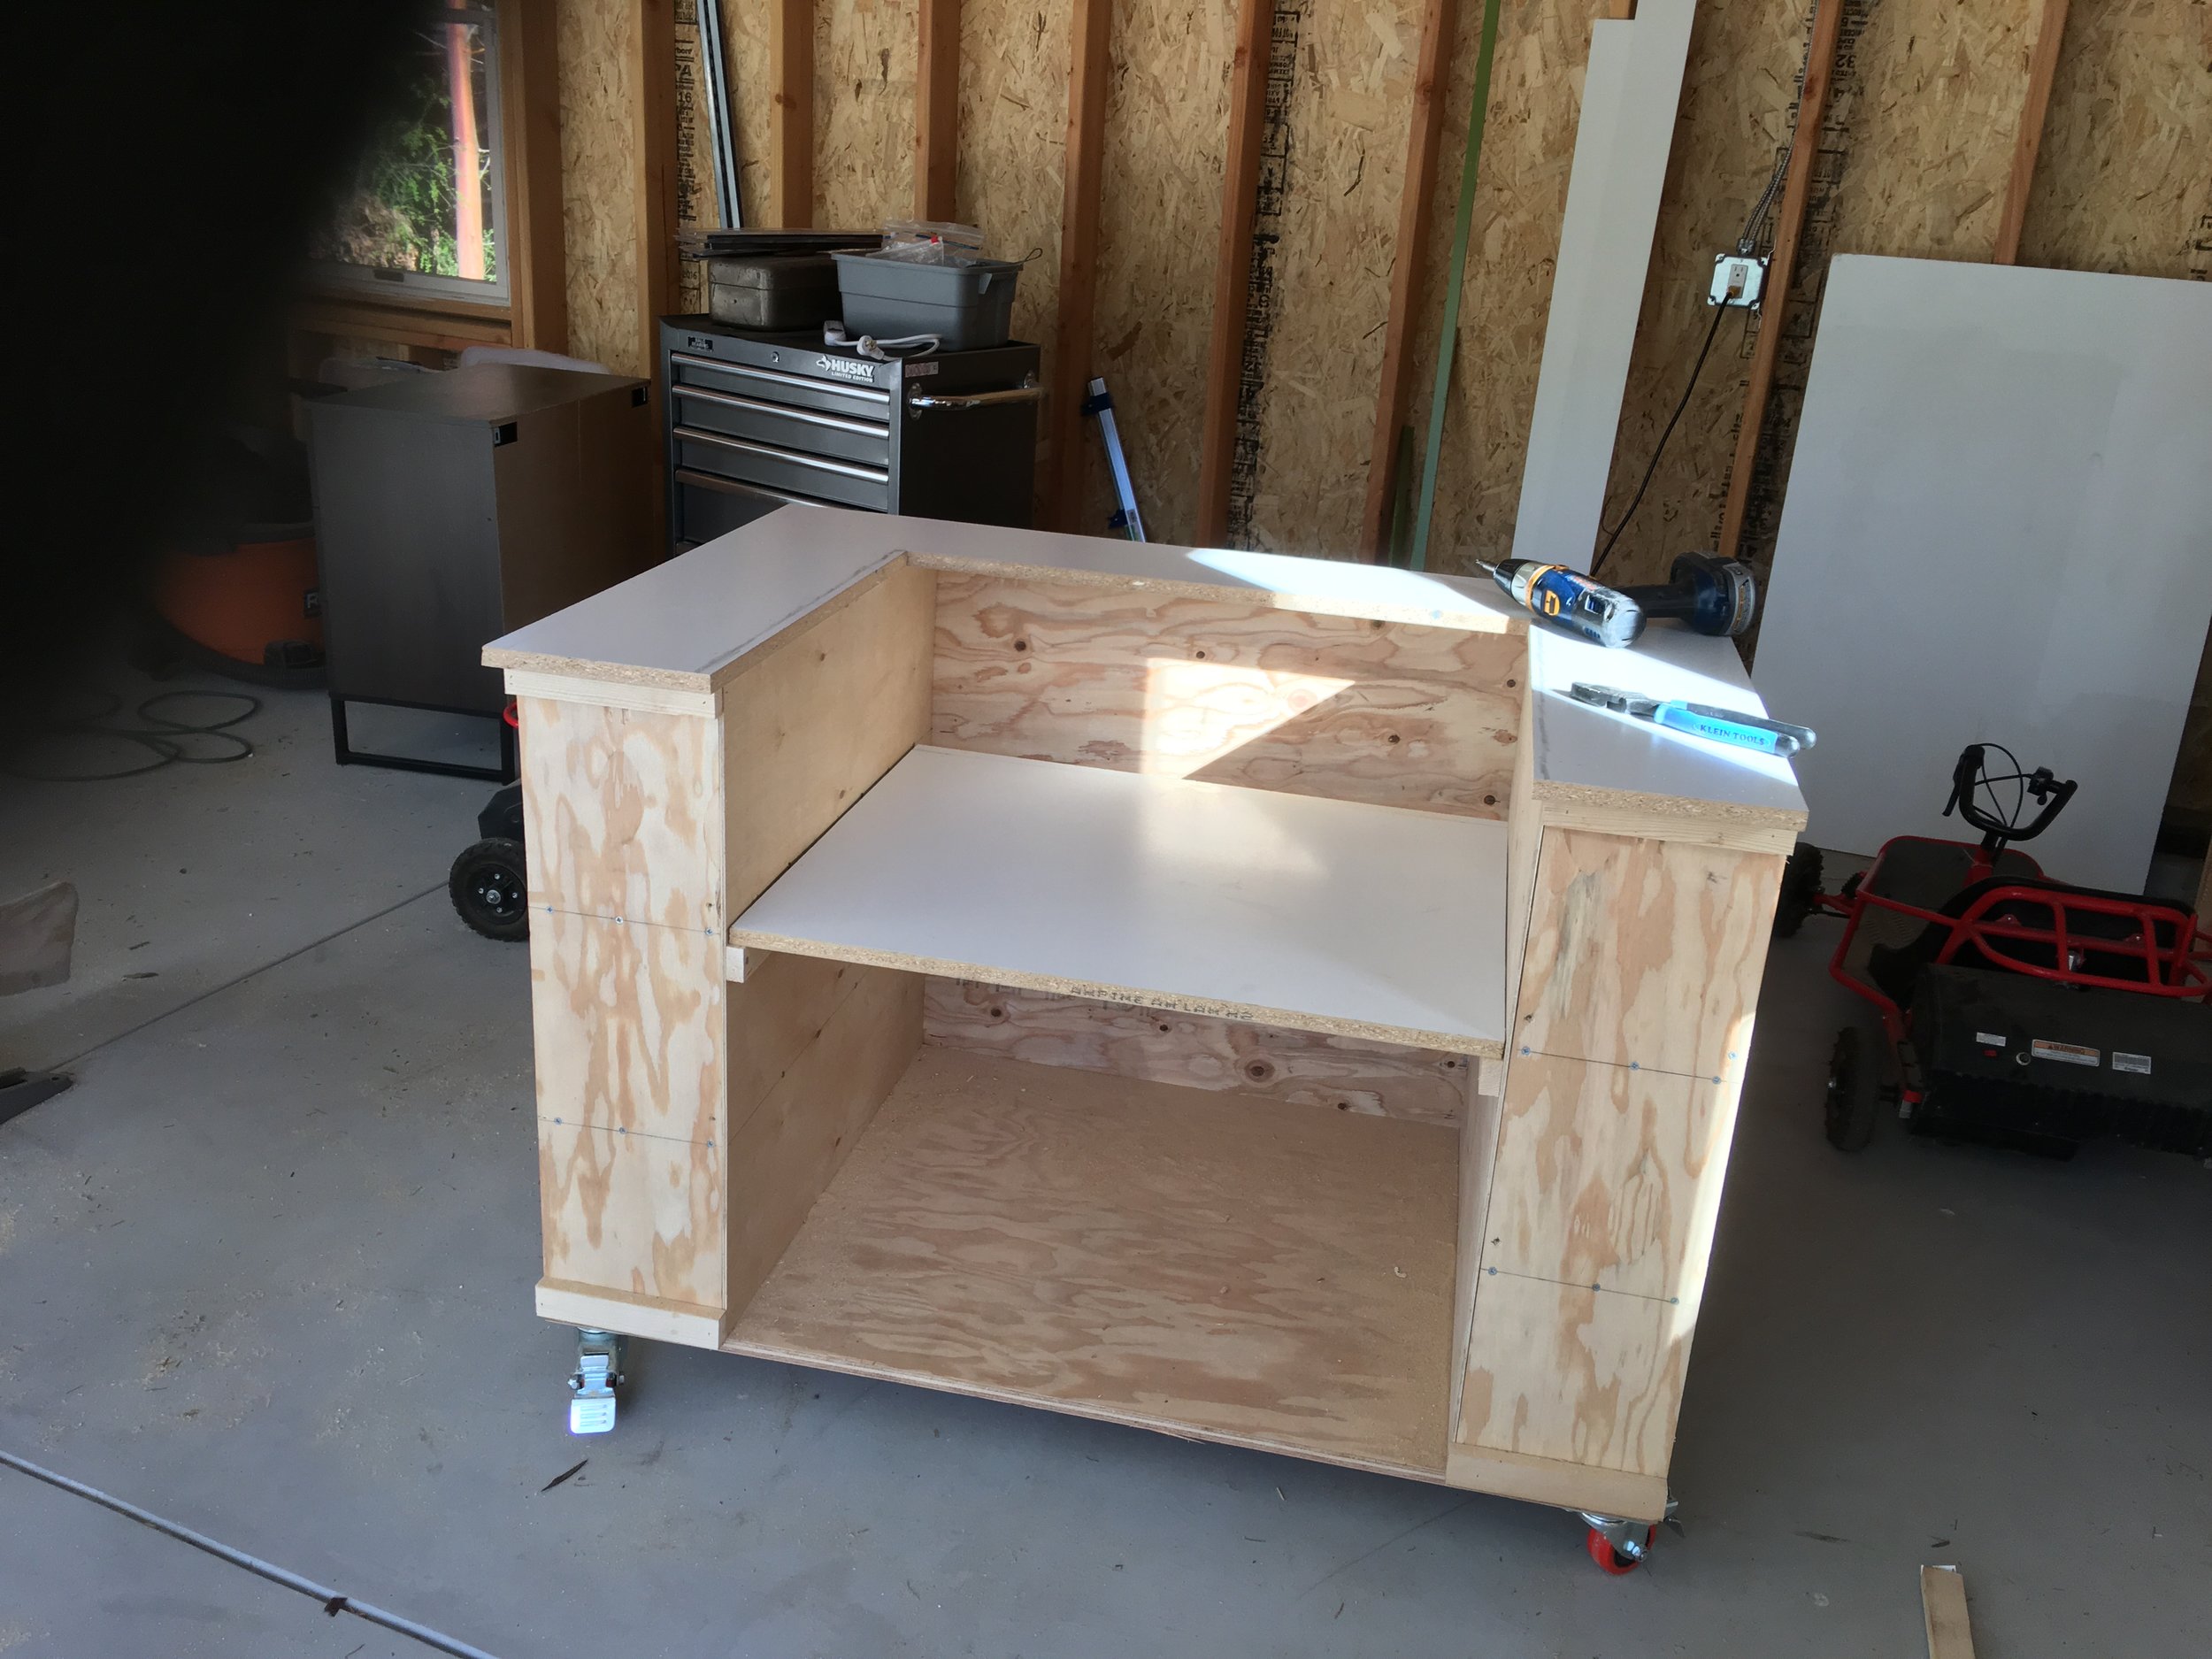 I used the cut out for the platform support for the table saw.